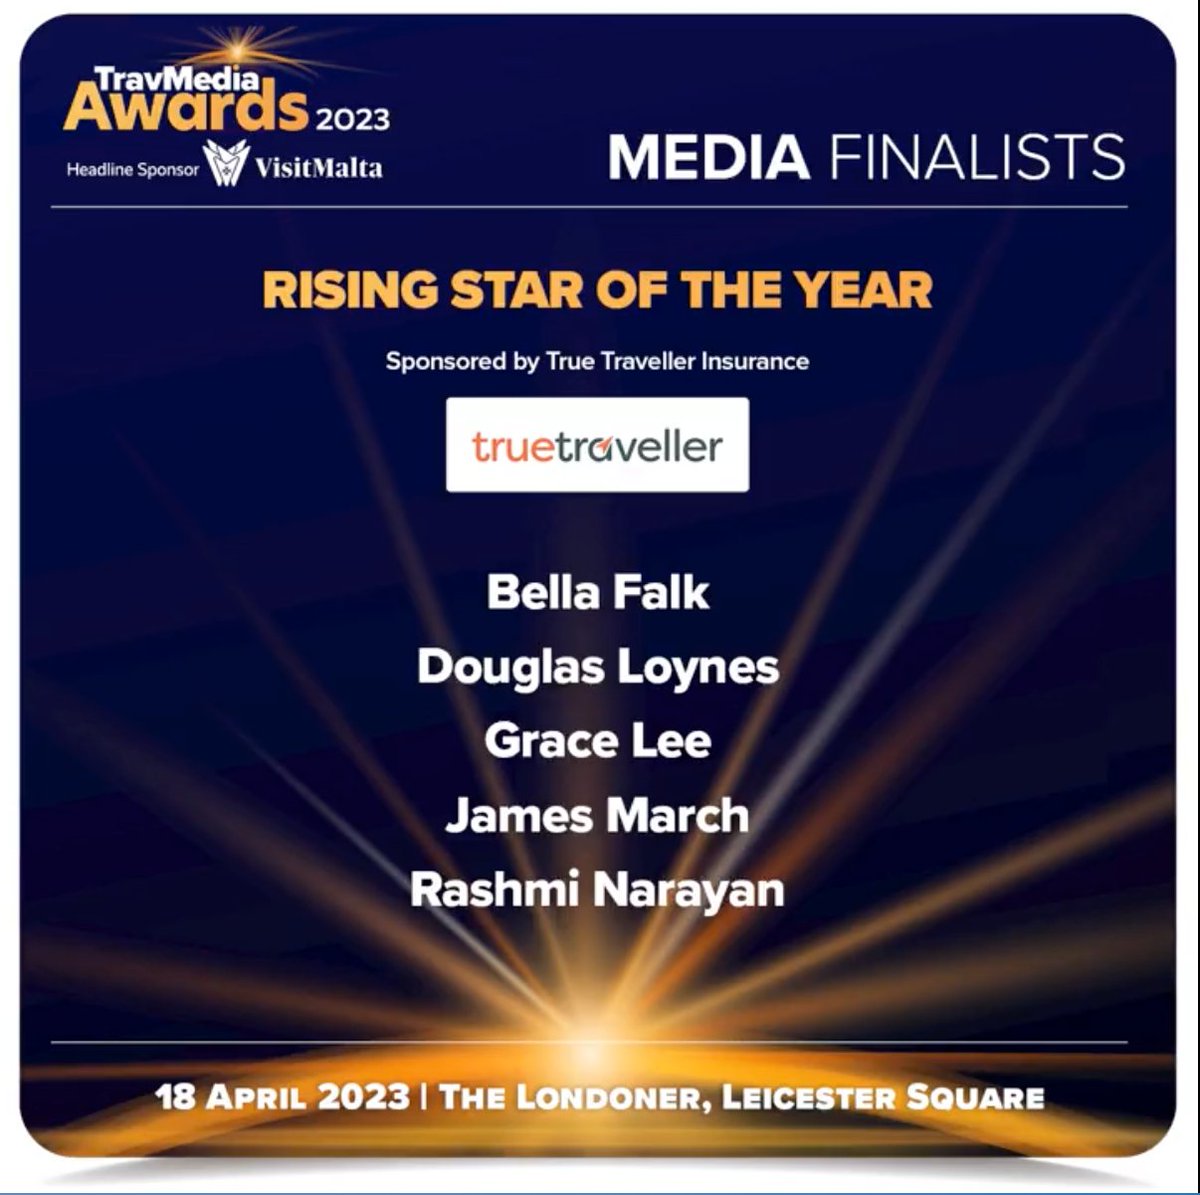 I'm up for Travel Writing Rising Star of the Year at tonight's #TravMediaAwards 🥳
I'm incredibly proud to even be nominated in such a crowded field of brilliant people. Looking forward to getting glammed up & celebrating 🥂 
Good luck to all the finalists!